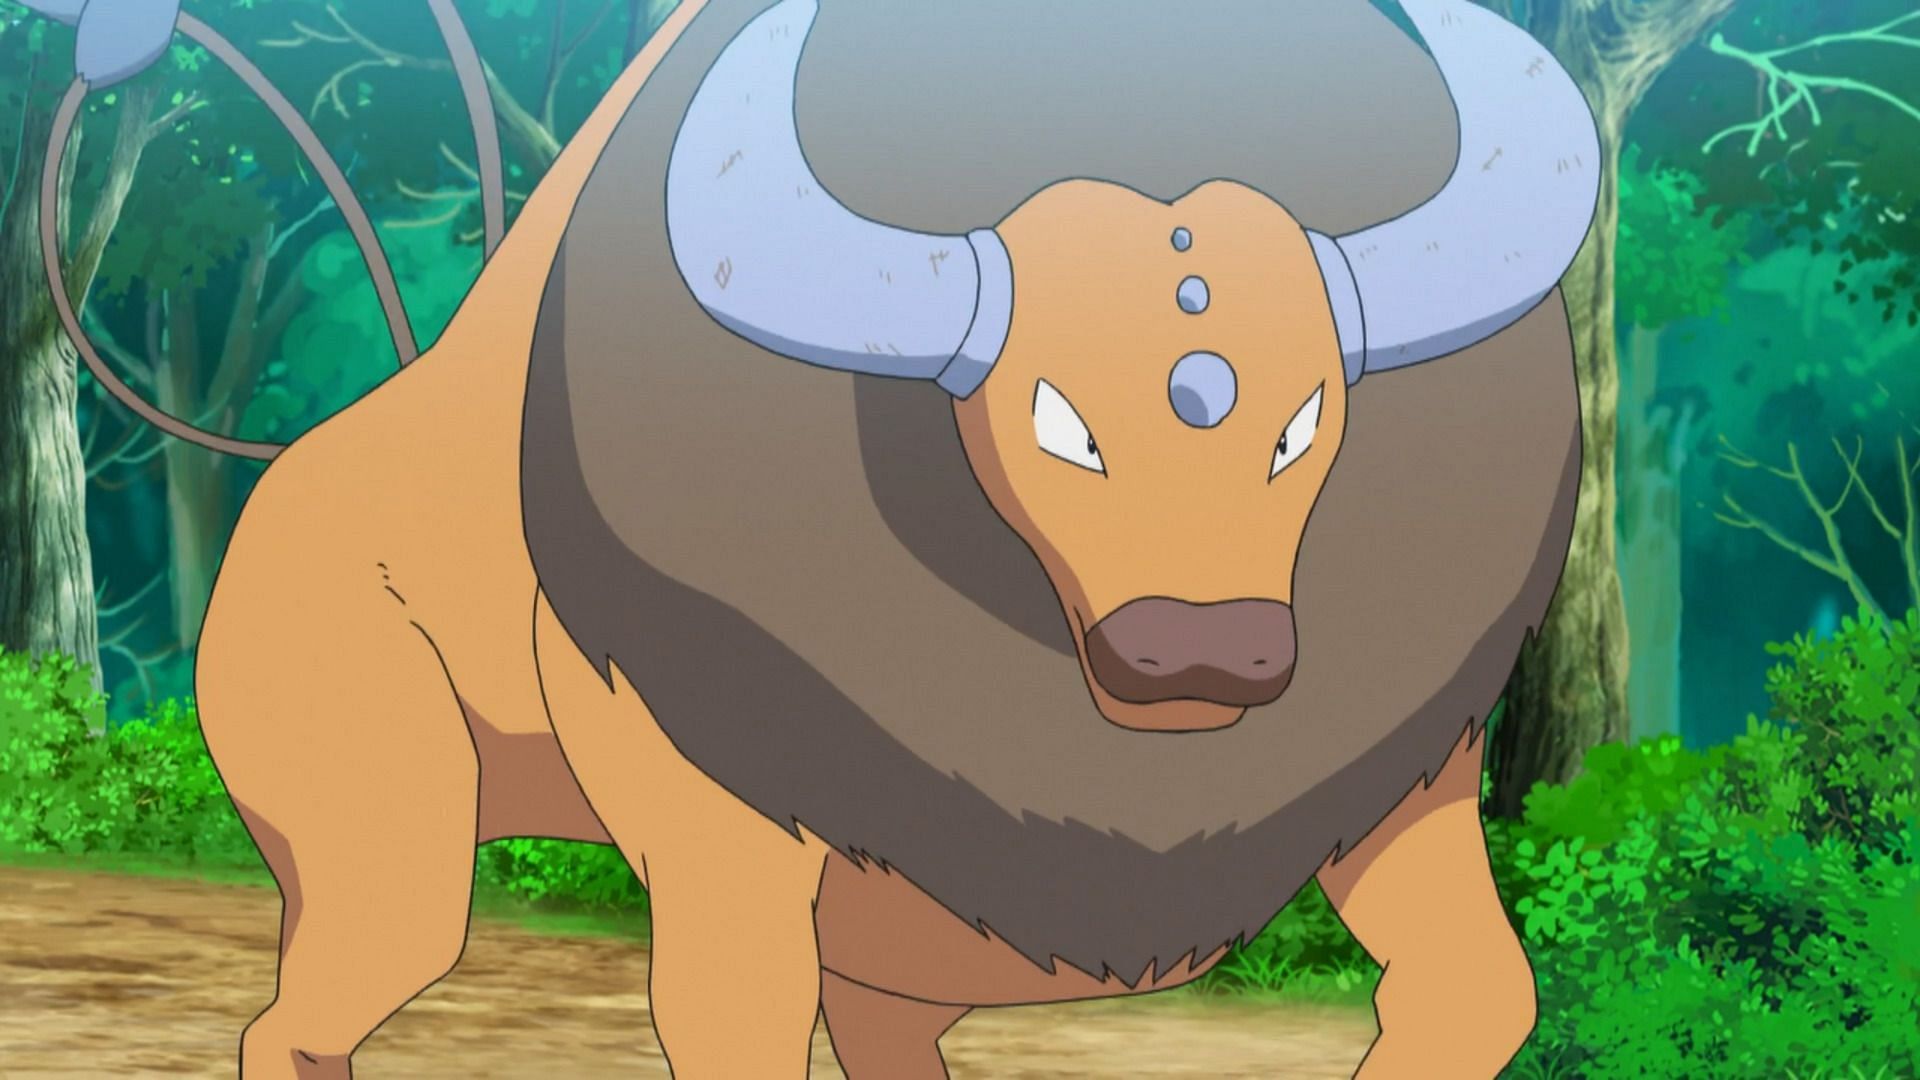 Tauros is one of the most famous Normal-types in the franchise (Image via The Pokemon Company)